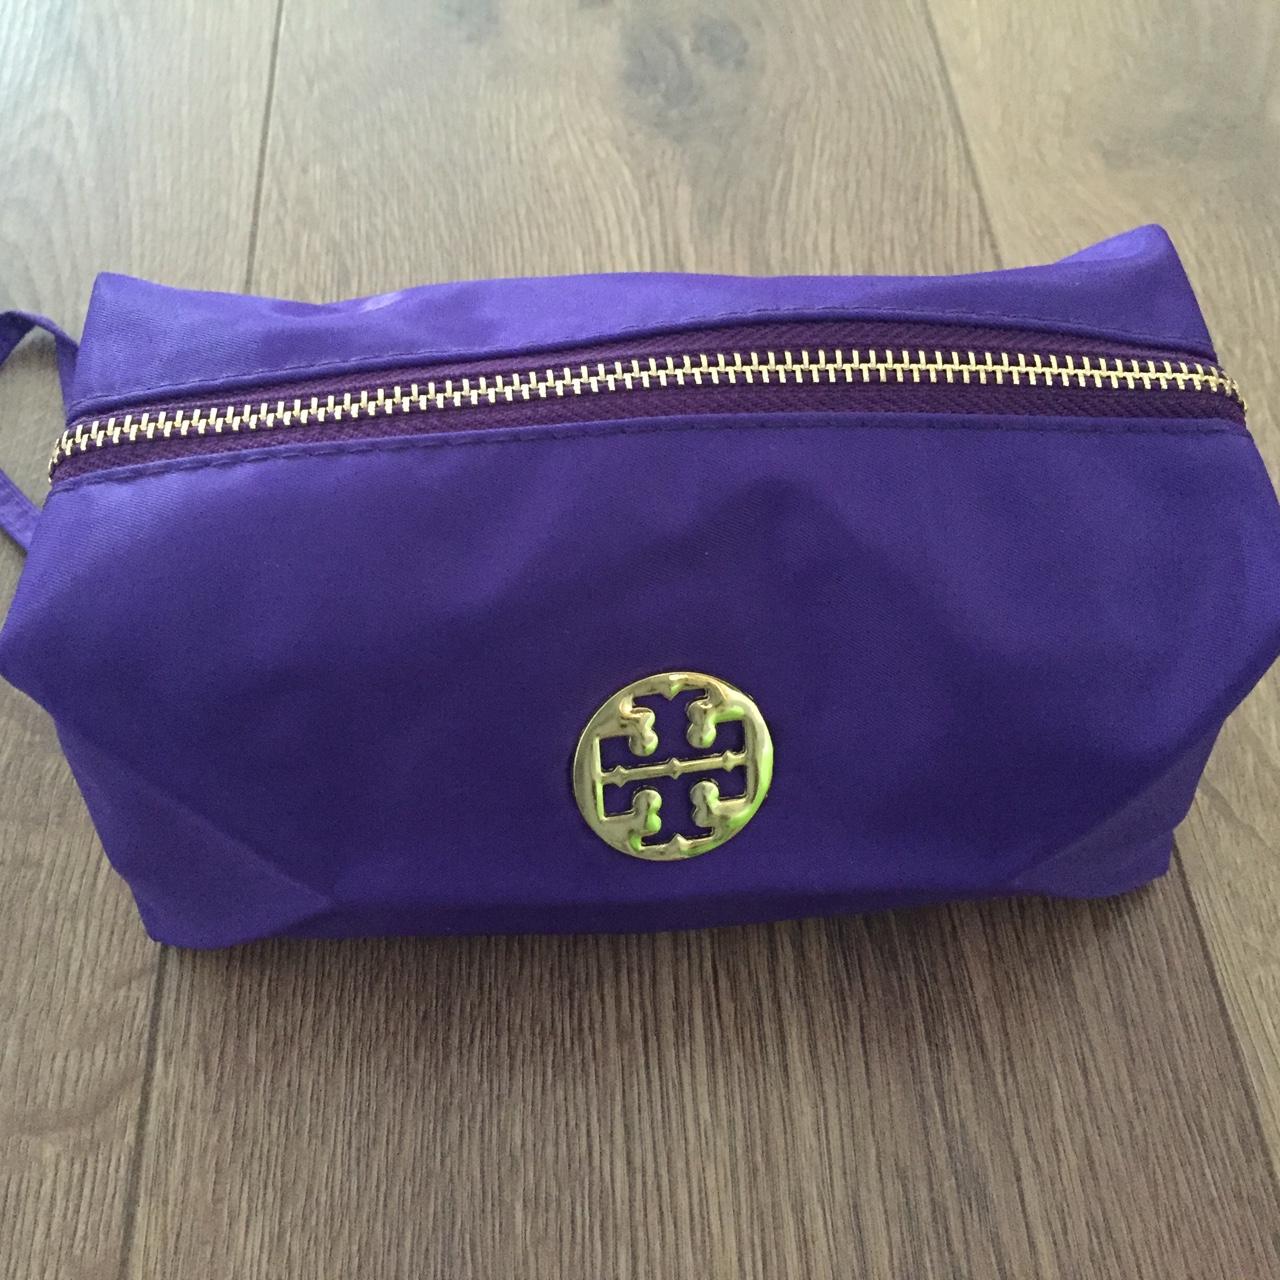 Just bought this gorgeous tory burch purse, on sale. : r/handbags